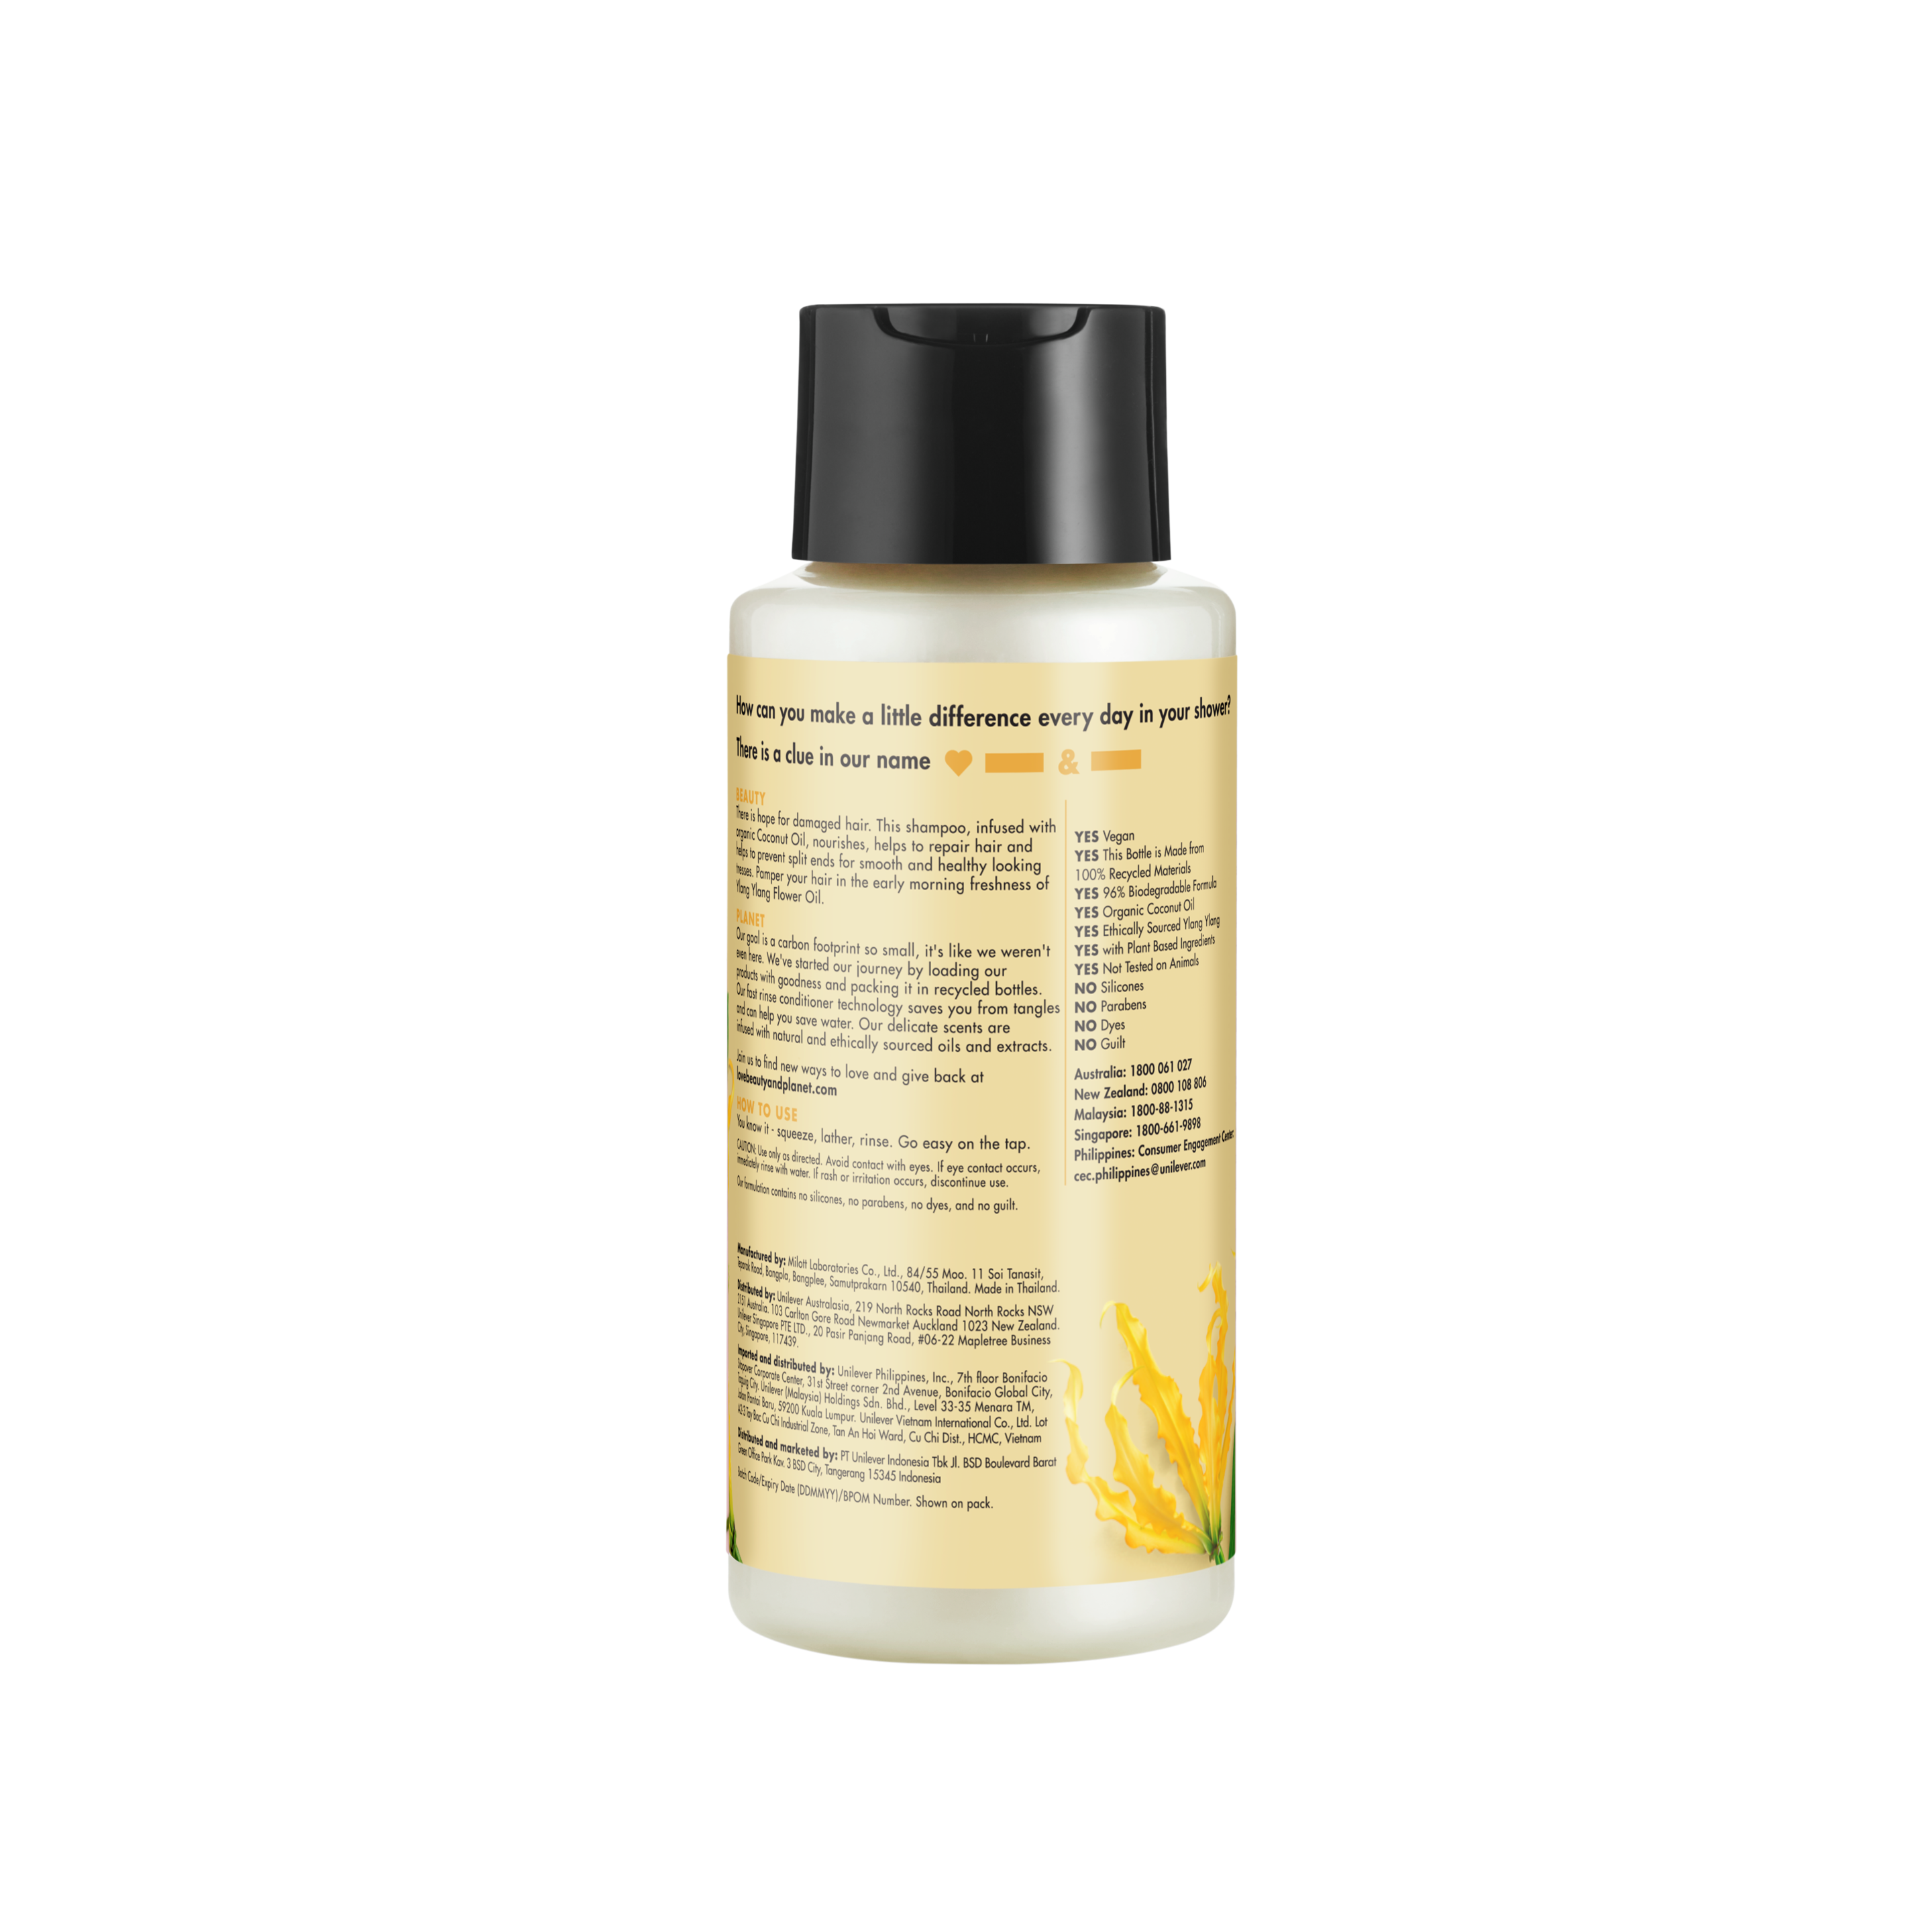 Coconut Oil & Ylang Ylang Conditioner